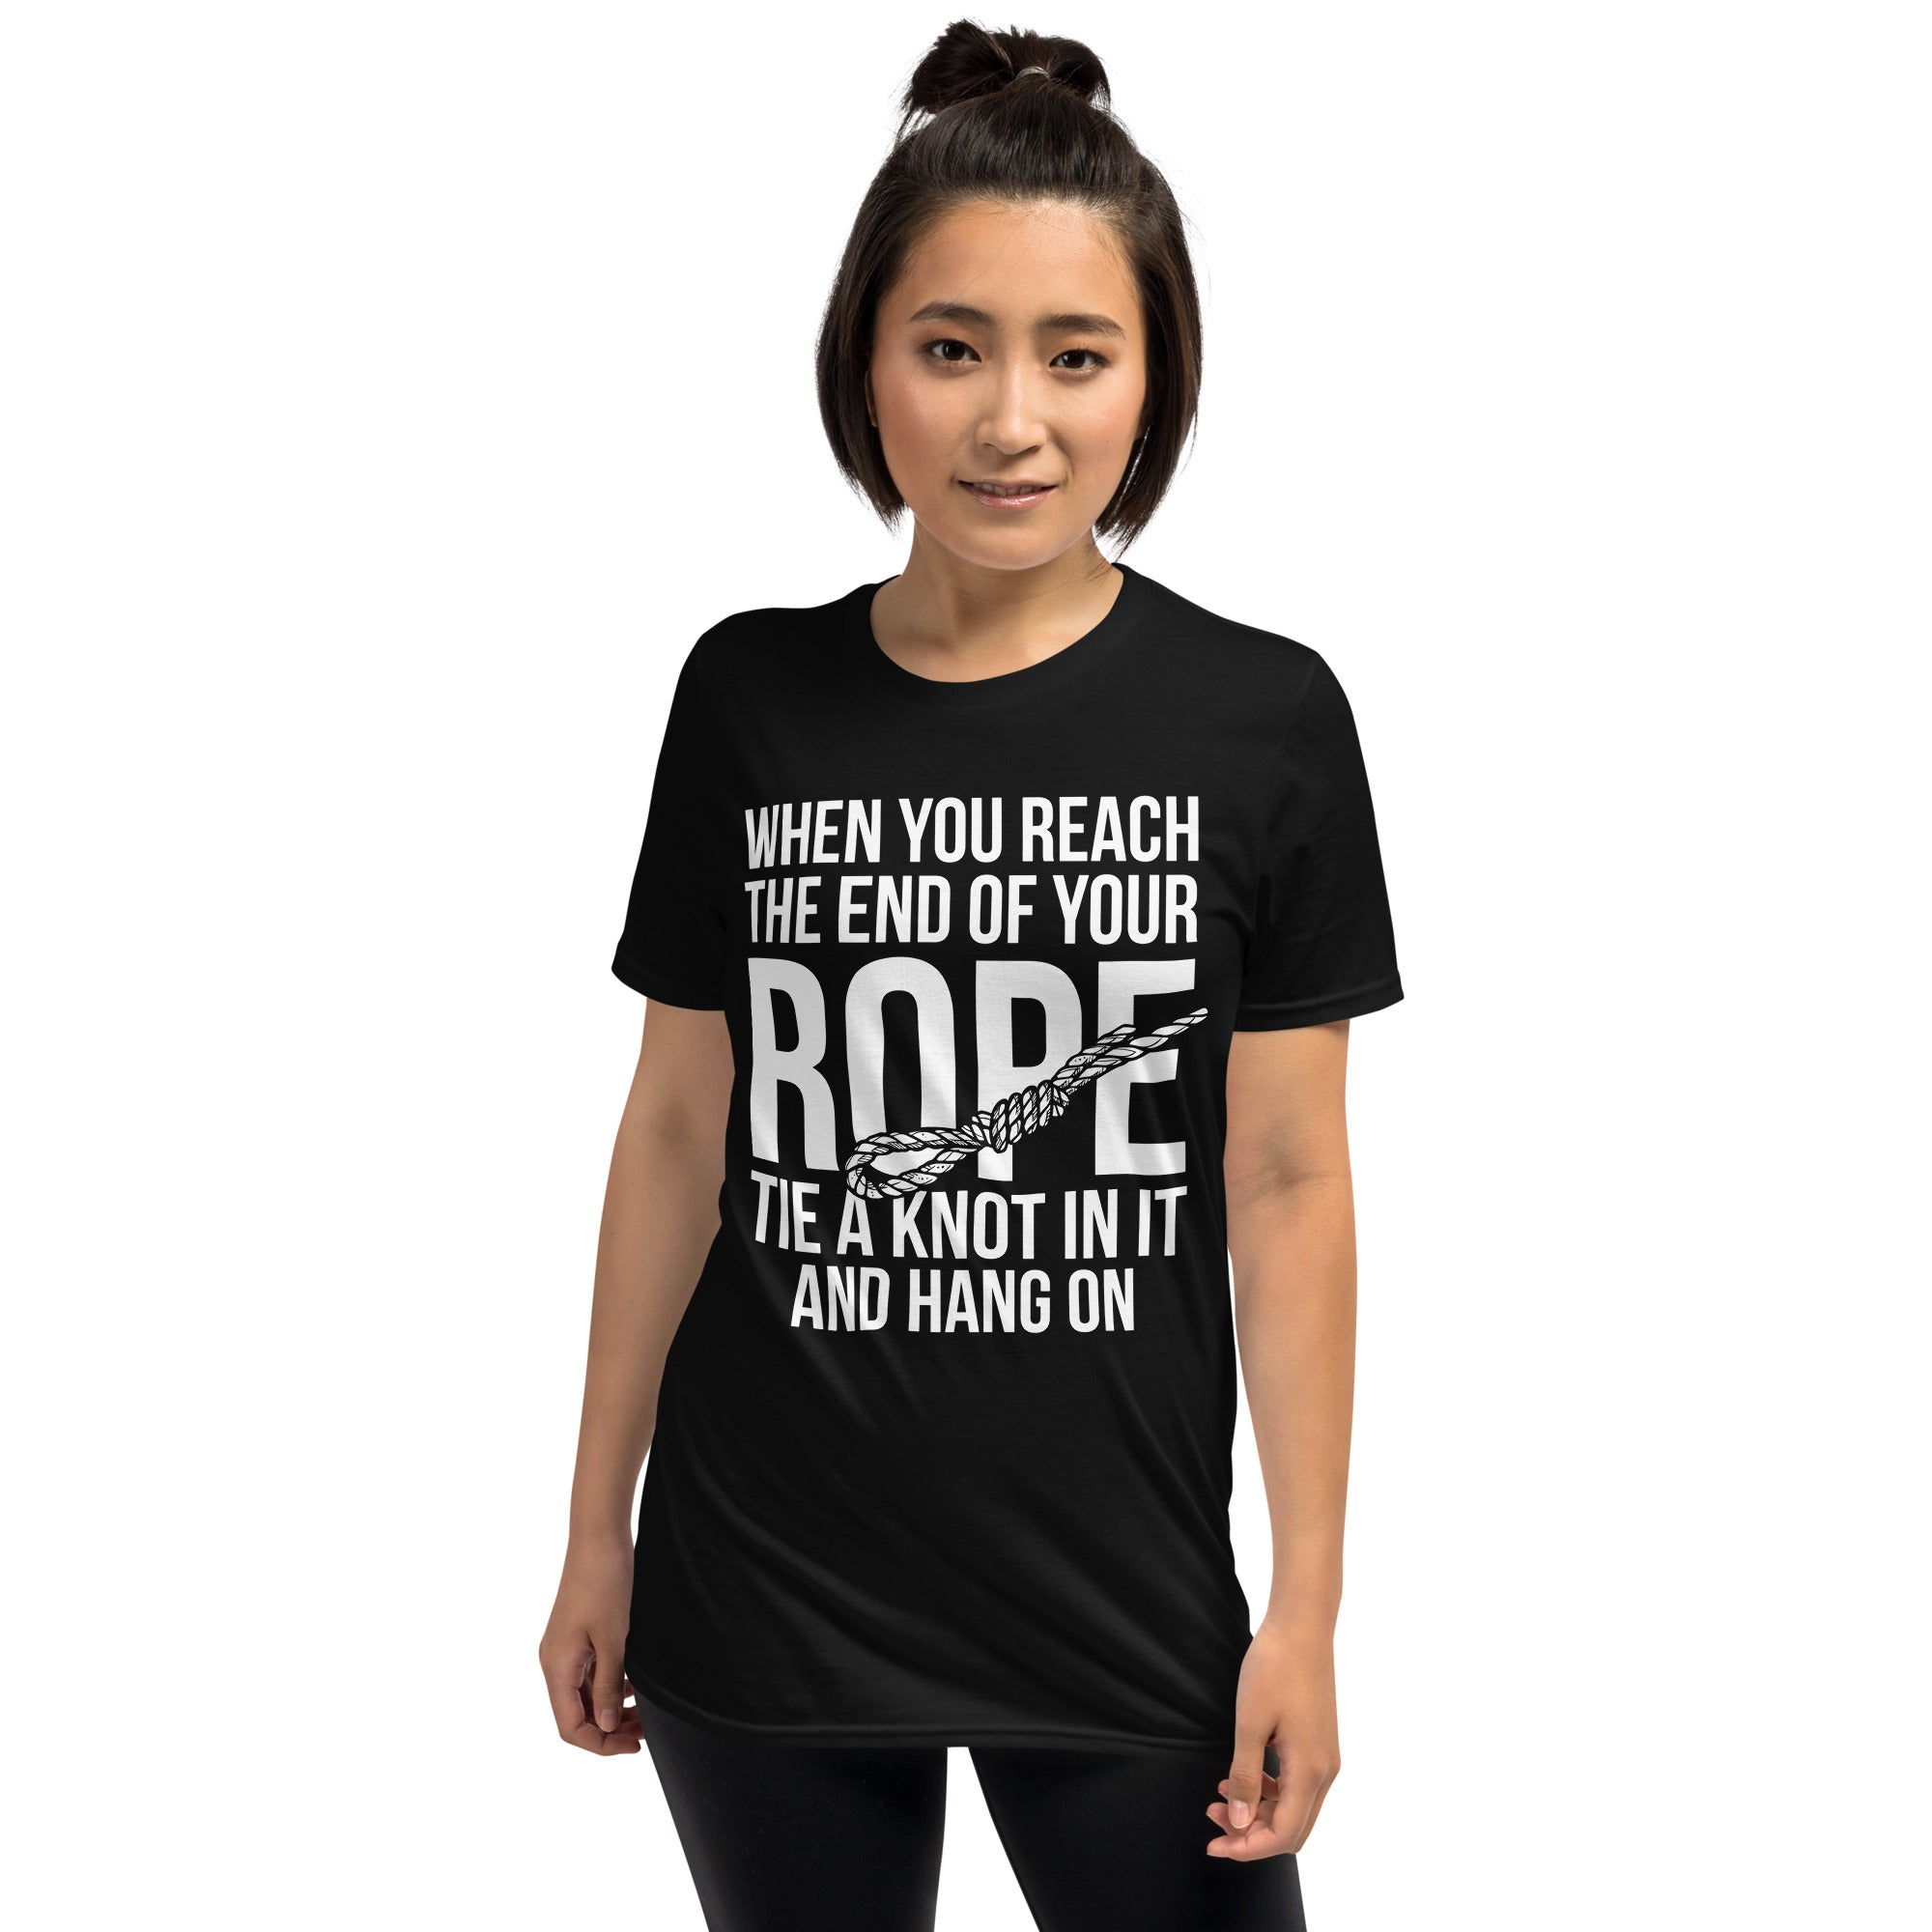 When You Reach The End Of Your Rope - Short-Sleeve Unisex T-Shirt